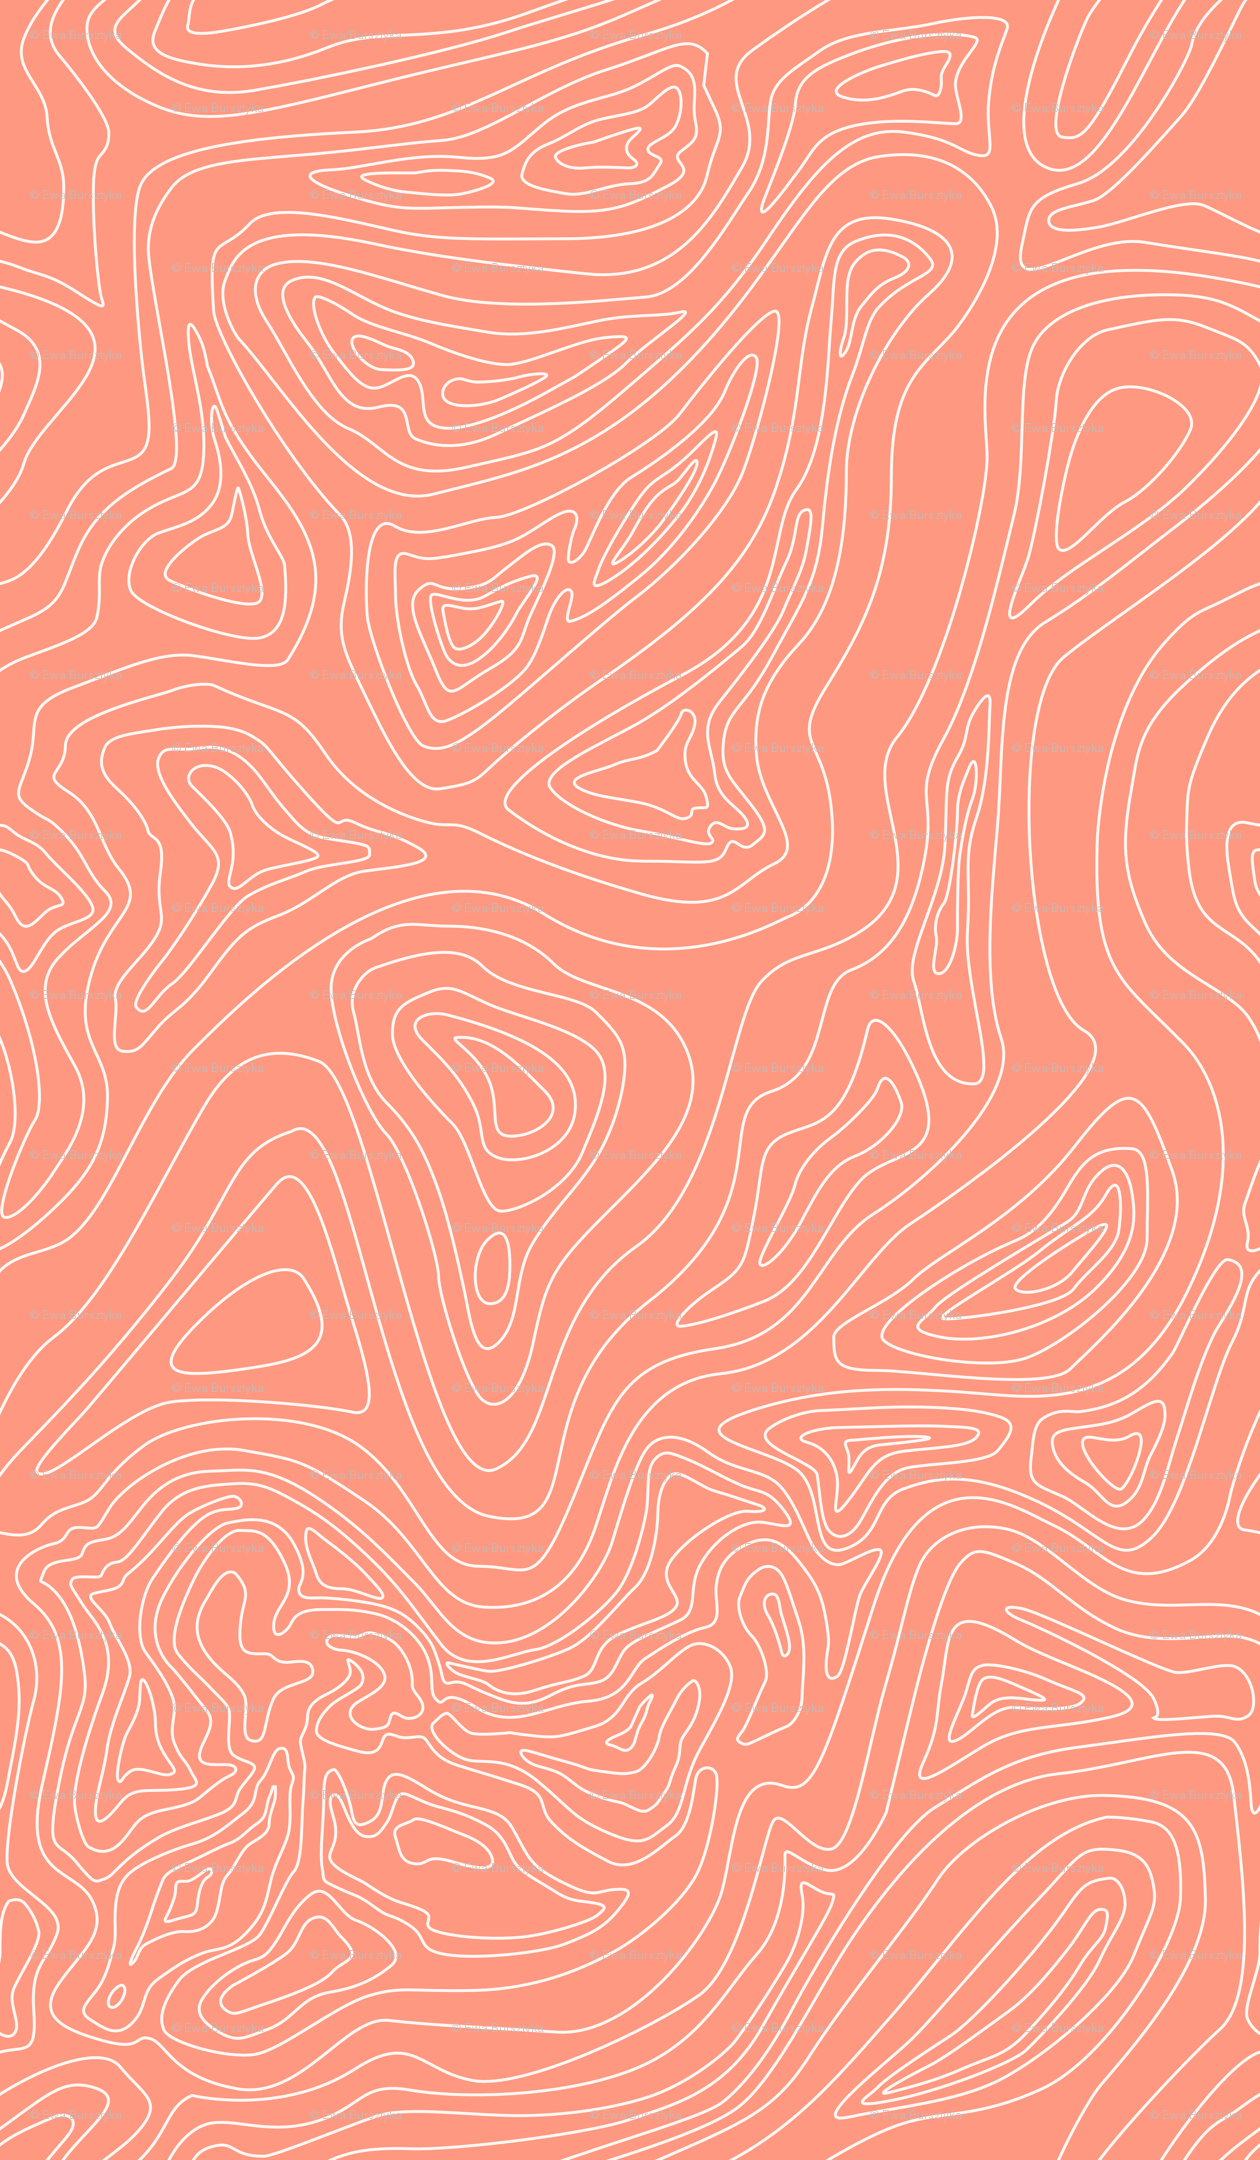 A close up of an orange and white pattern - Coral